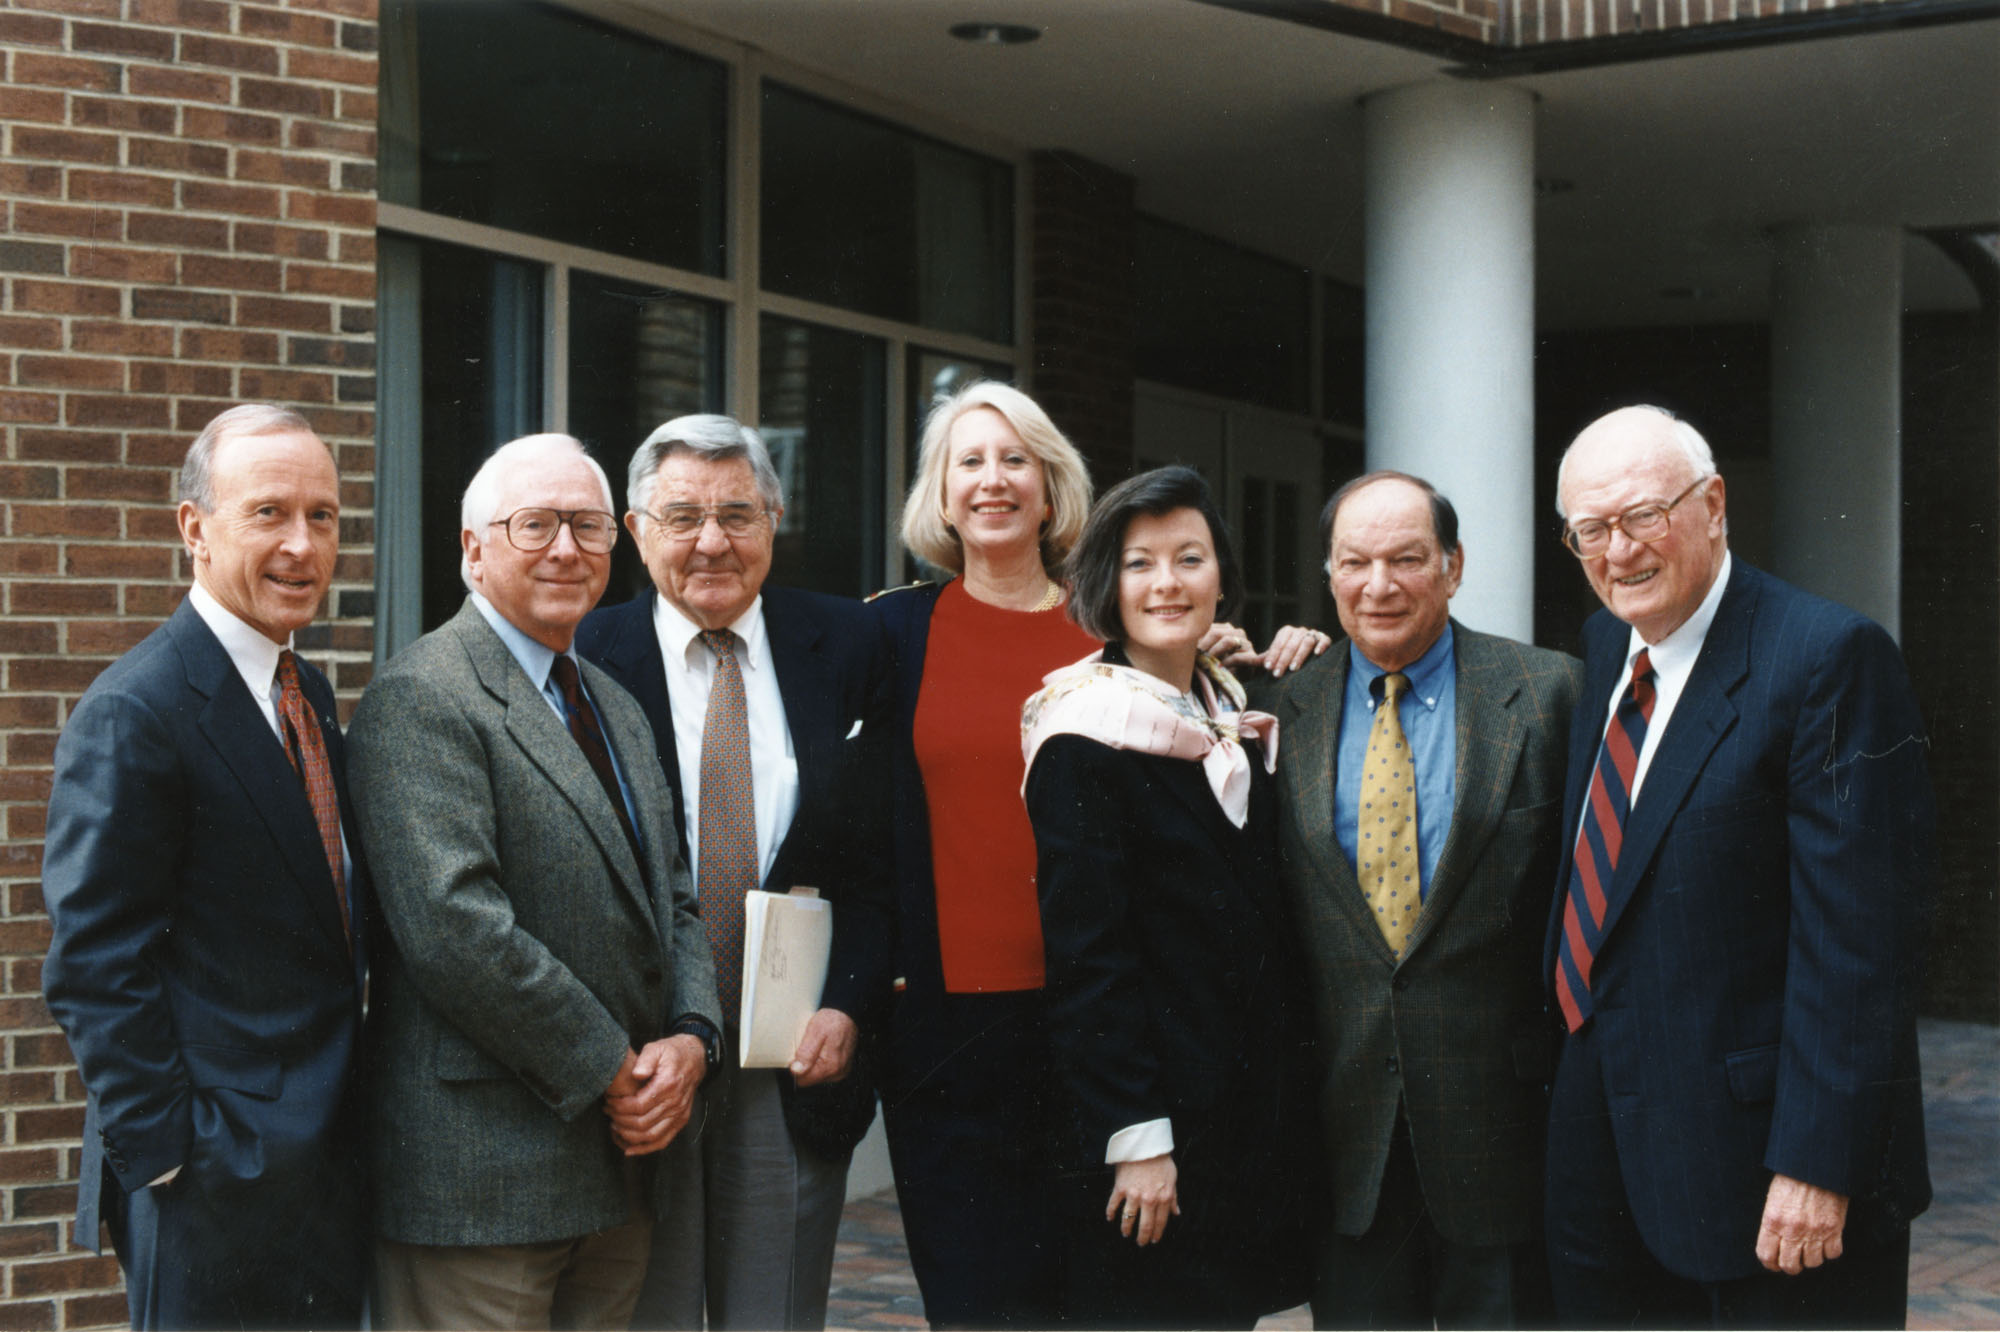 Group portrait of Cape Hatteras Lighthouse committee members, possibly outside the Carolina Club on the UNC campus. Left to right: Jim Heavner (CEO, The Village Companies of Chapel Hill and broadcaster); James G. (Jim) Babb (Executive VP, Jefferson Pilot Communications); Dr. William Friday (UNC President); unknown; unknown; Julian Scheer; and Hugh Morton.